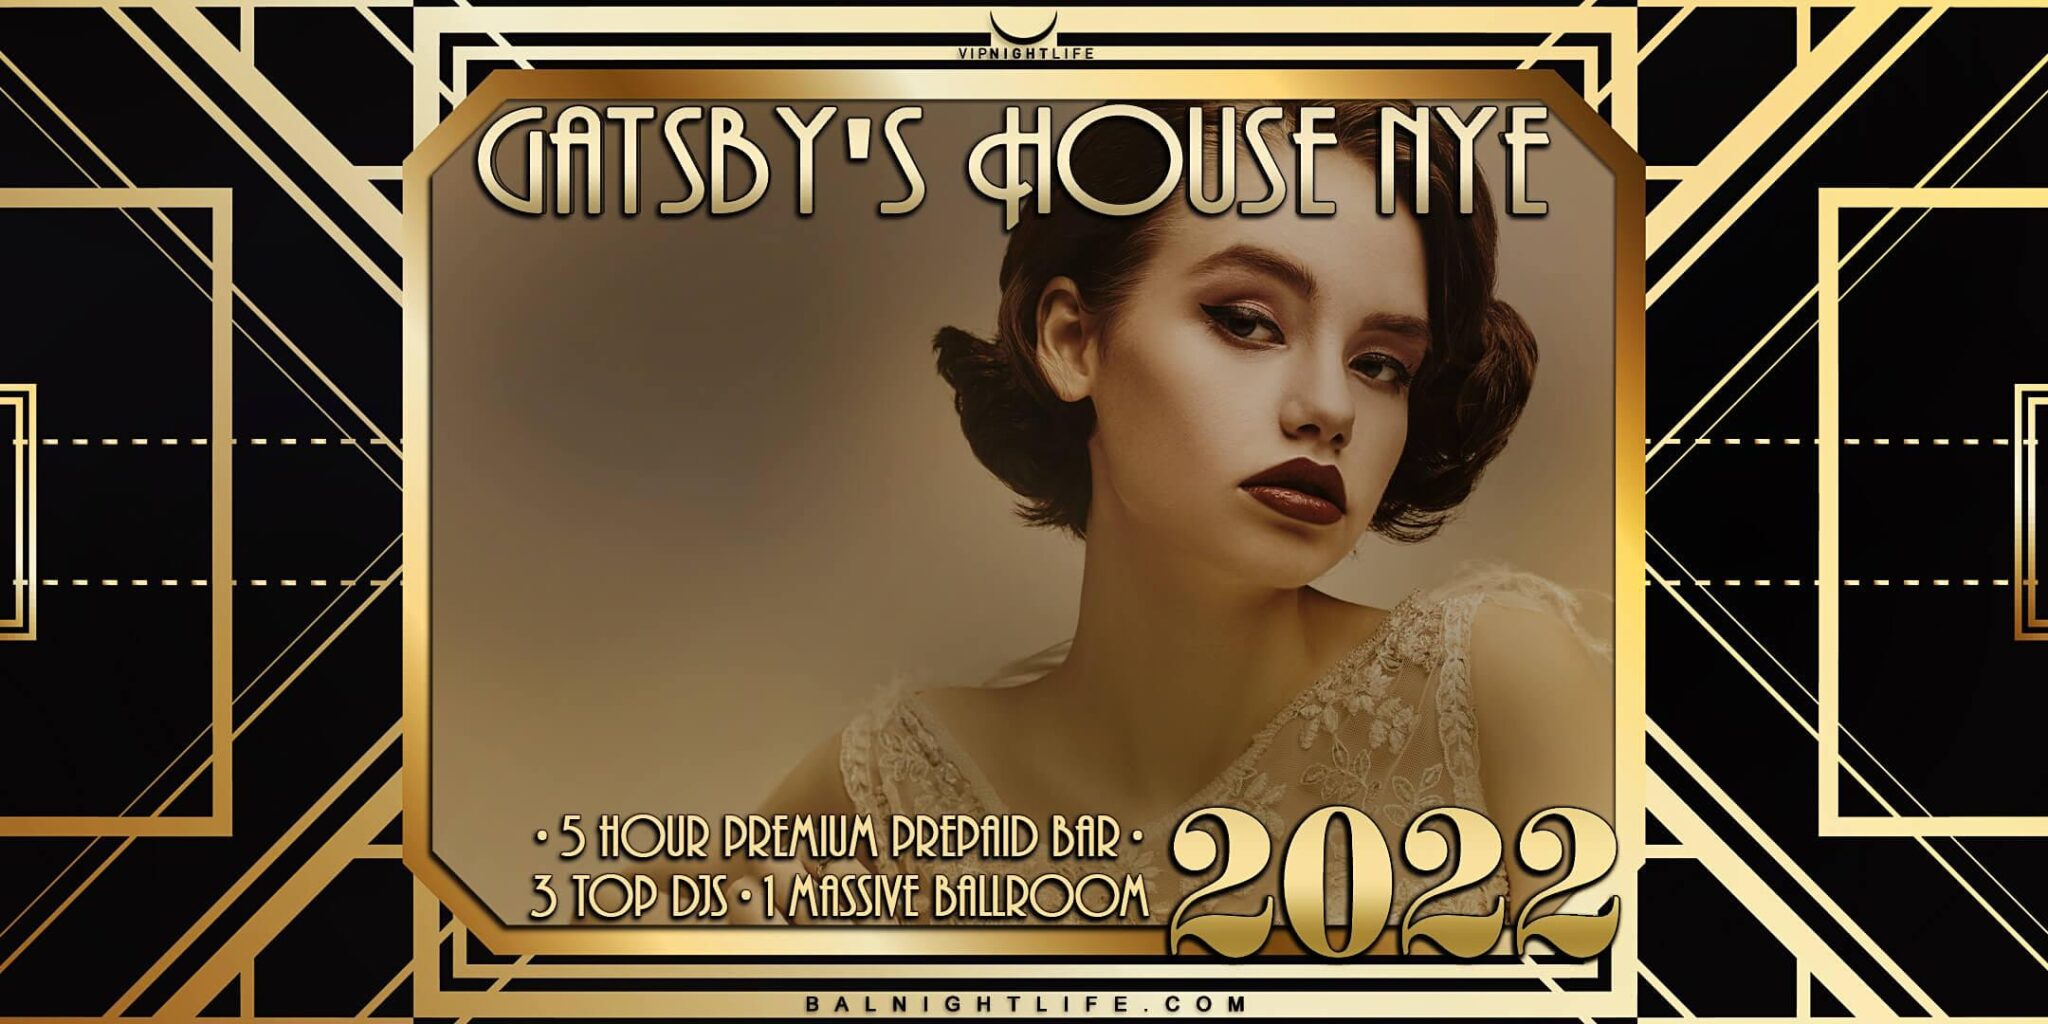 2022 Baltimore New Year's Eve Party Gatsby's House VIP Nightlife